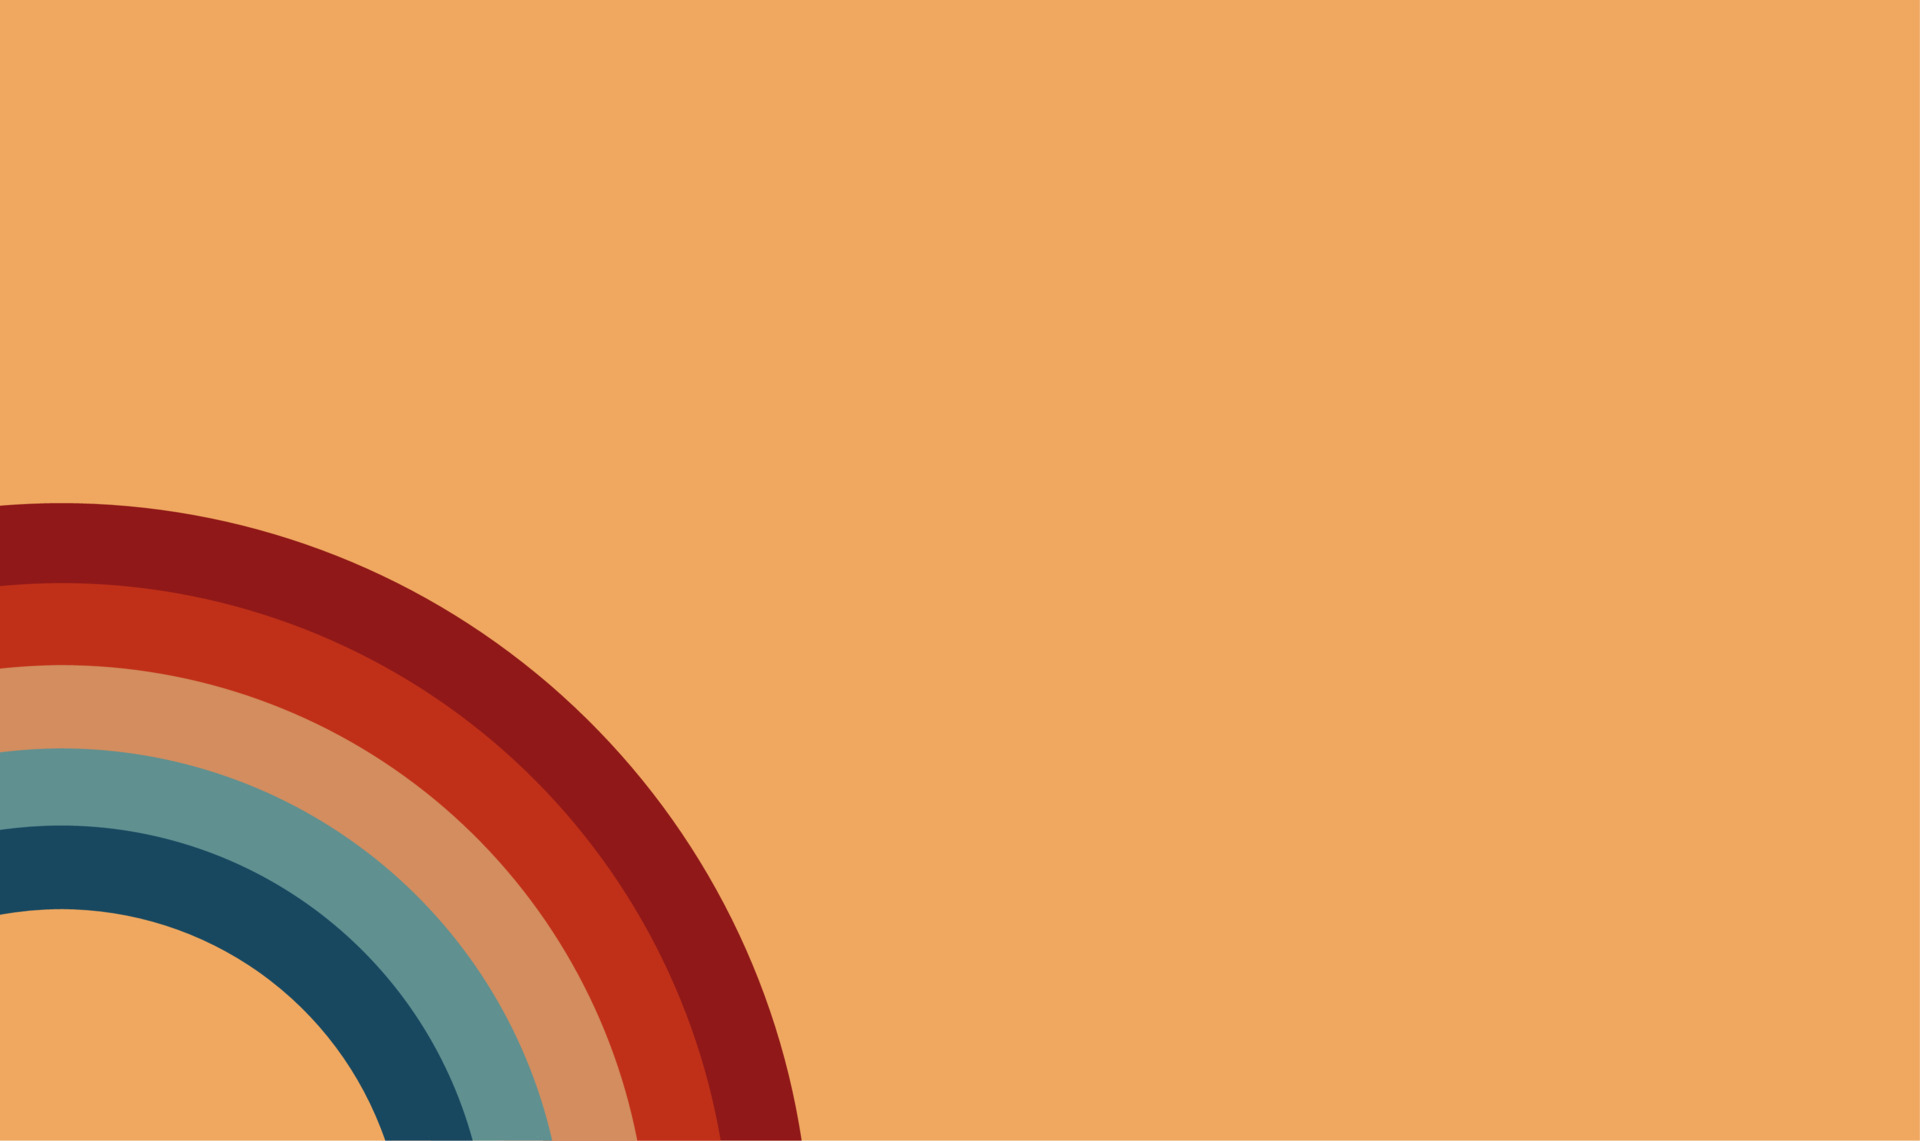 A rainbow colored background with an orange and blue gradient - Vintage